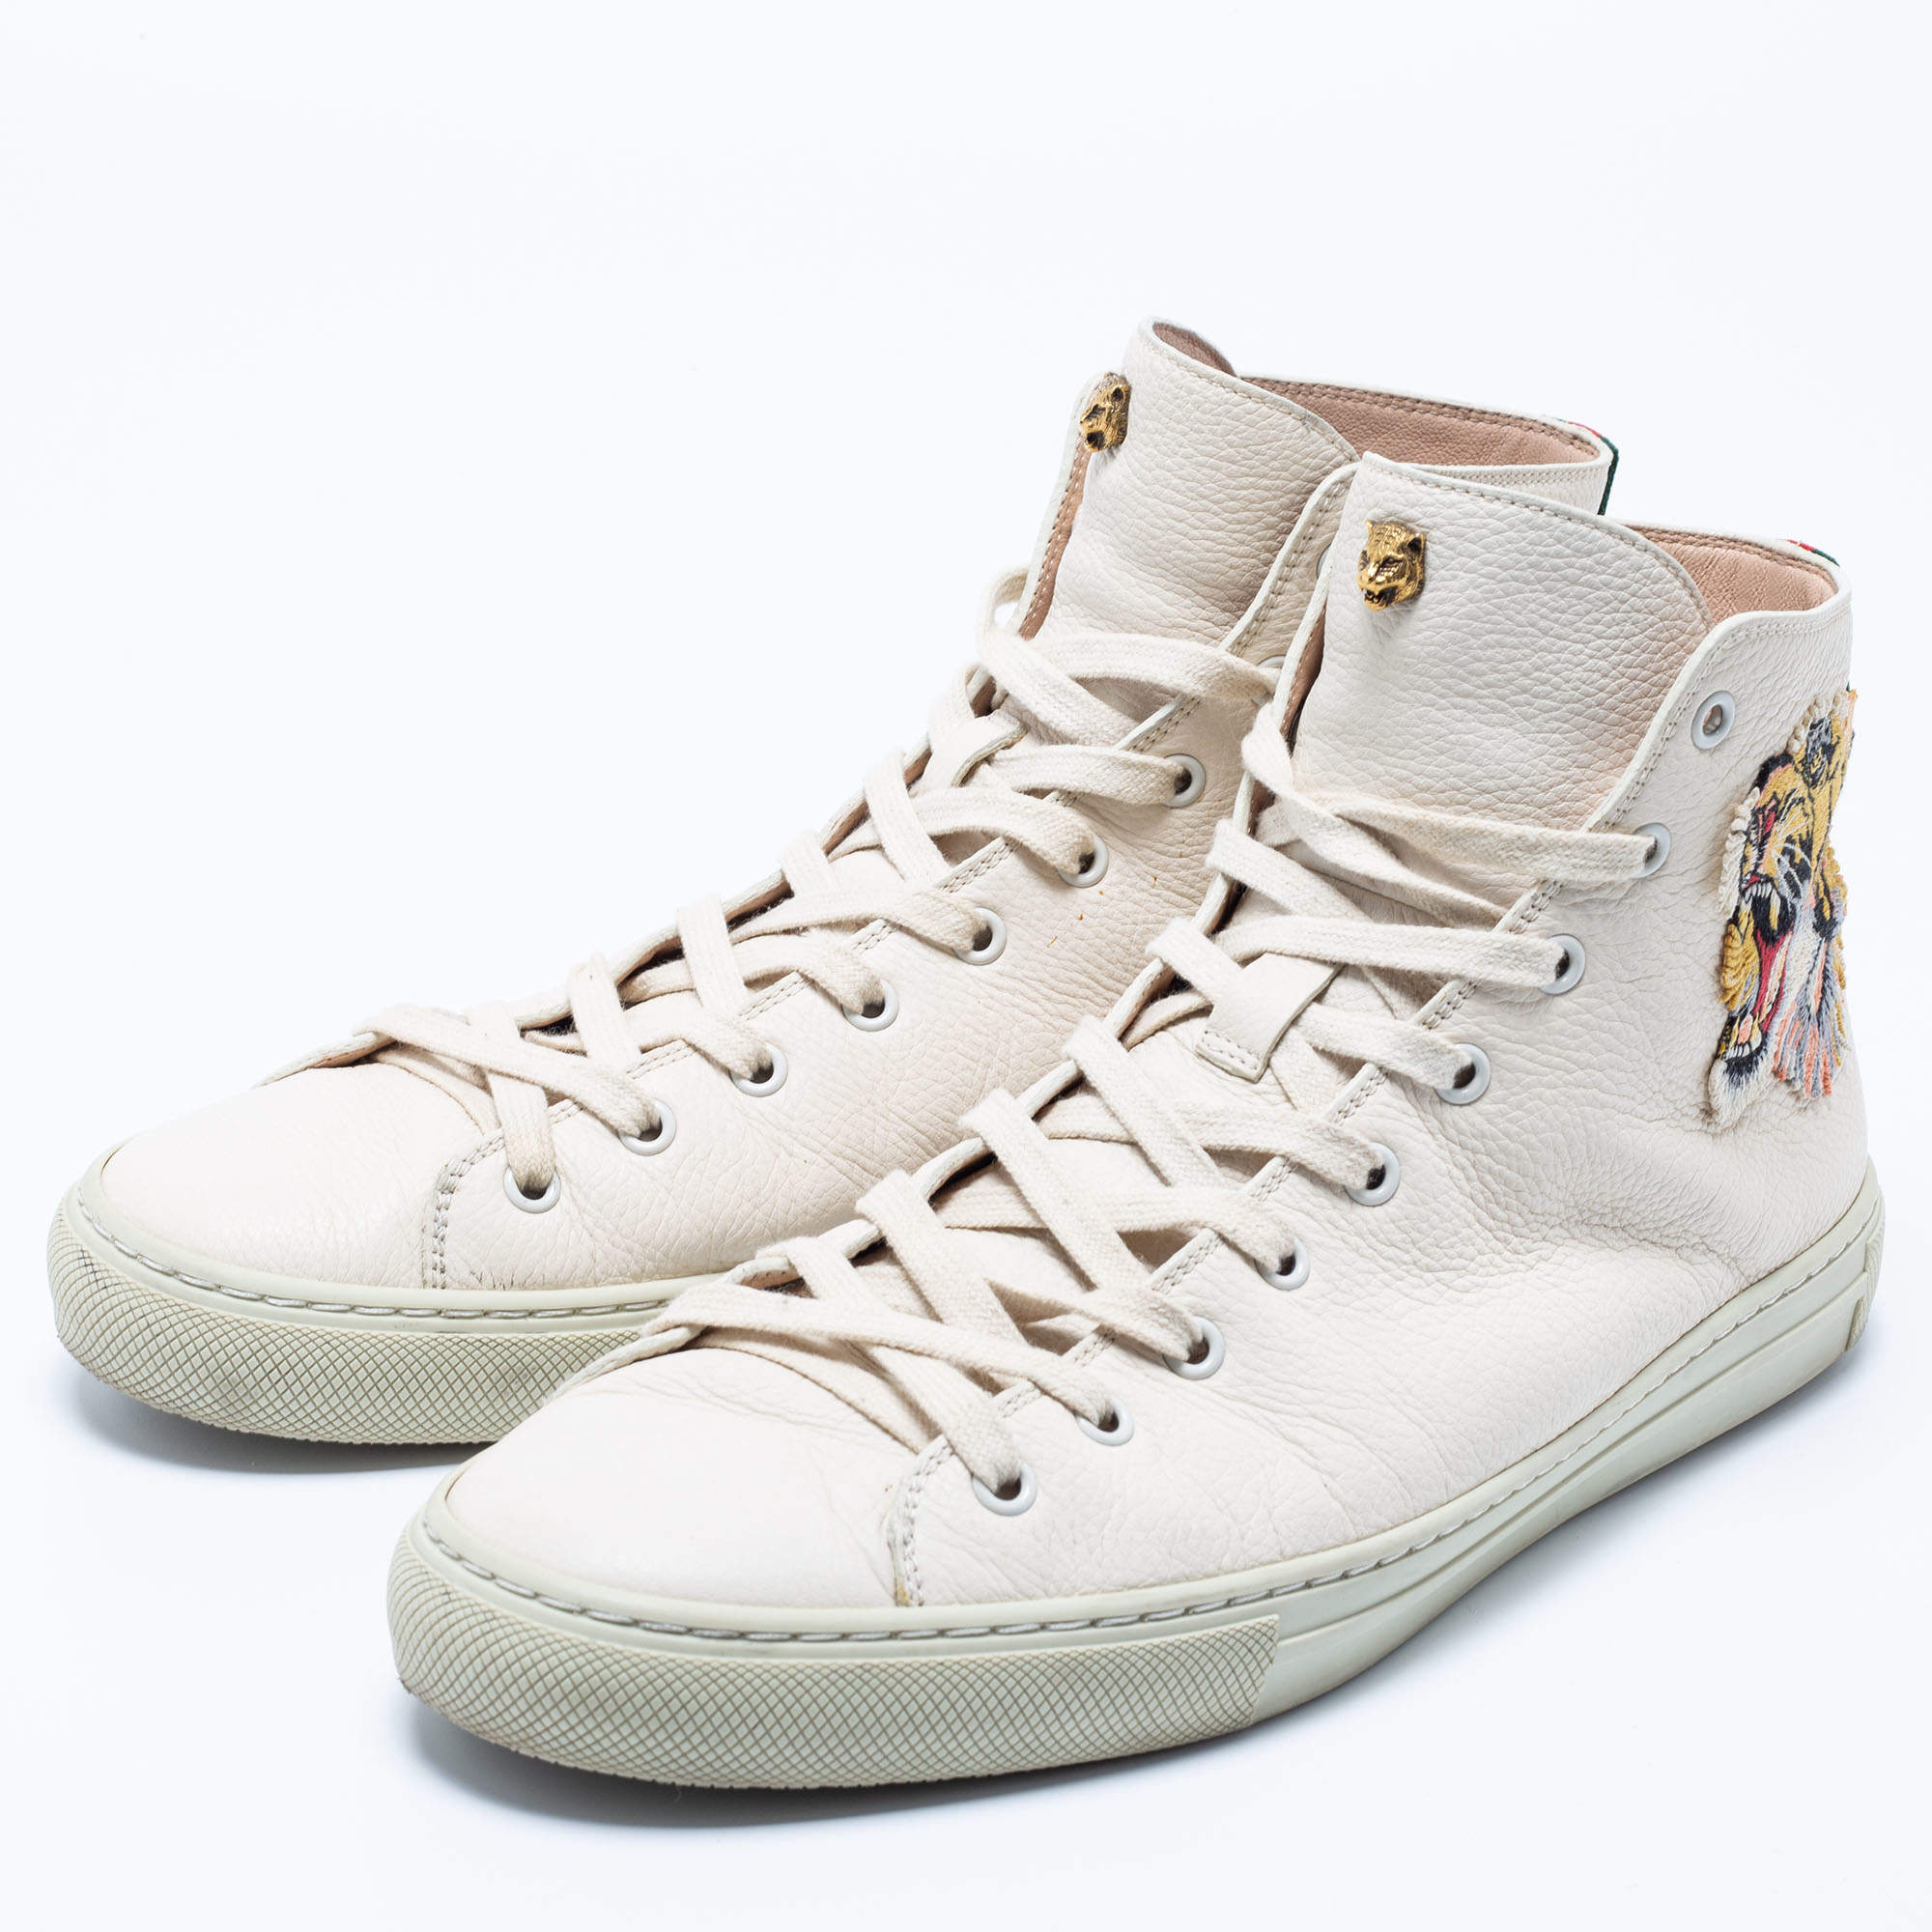 Trainers Gucci - Tiger embroidered high top sneakers - 478337BXOA09064